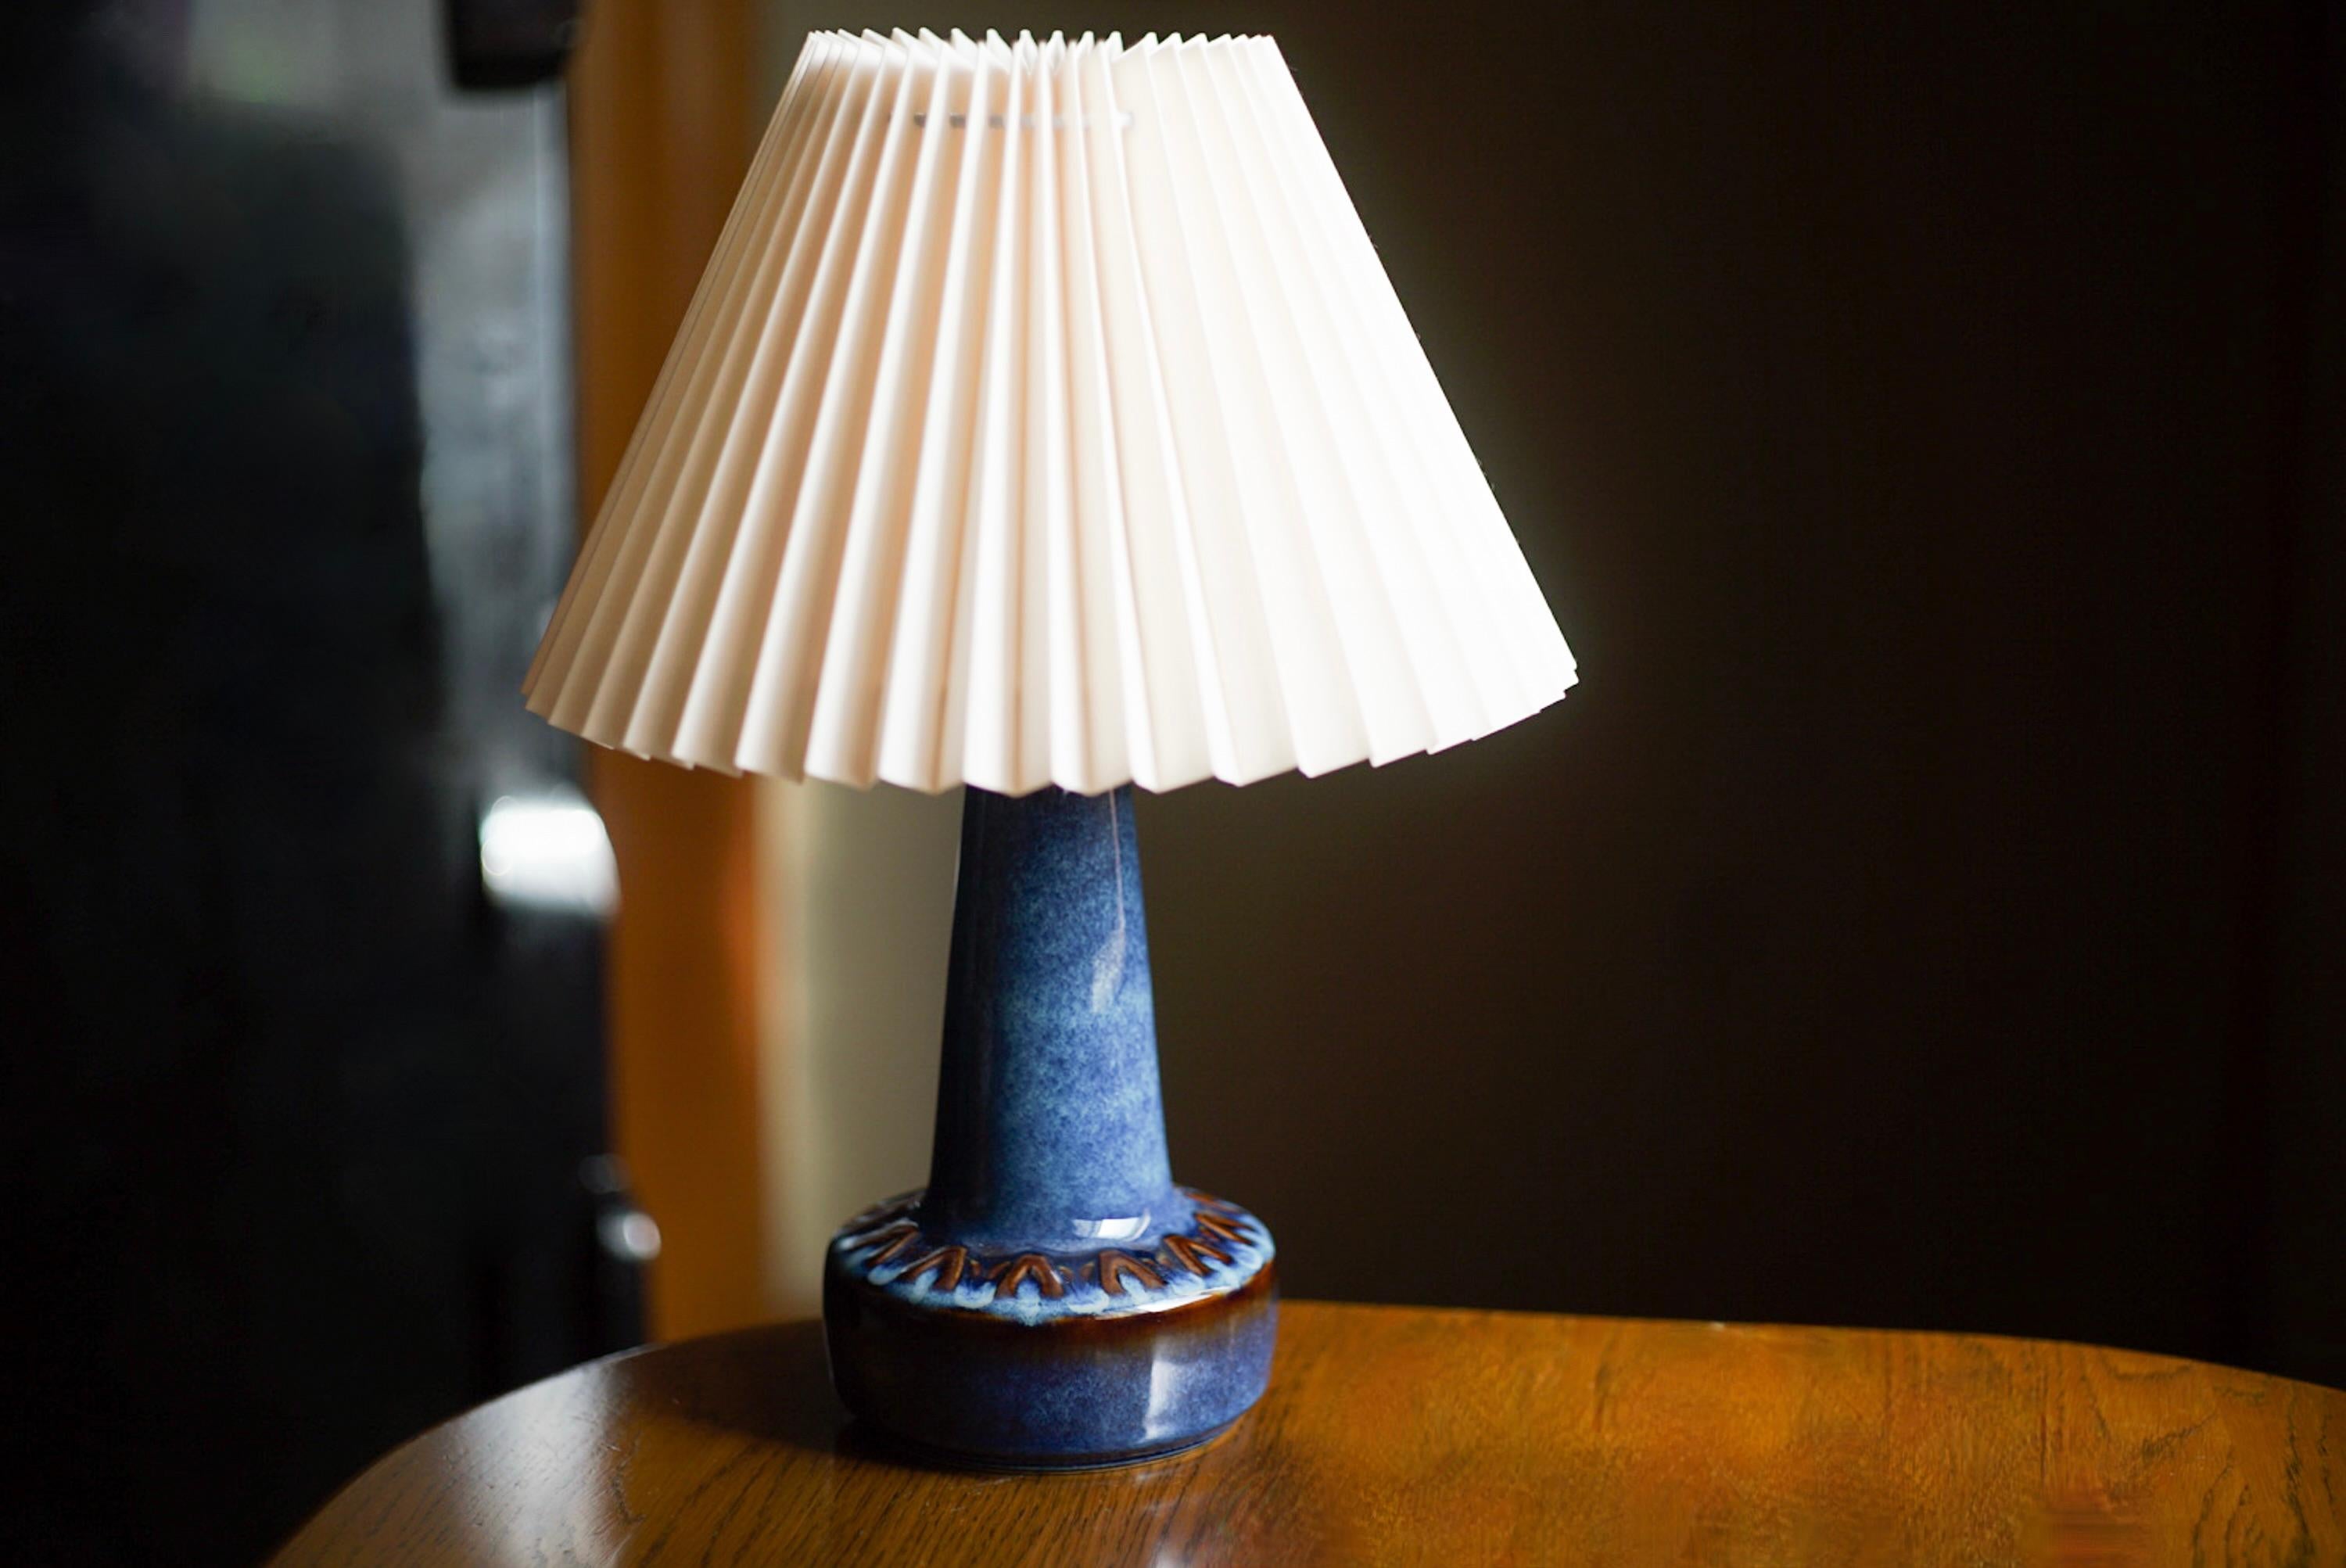 A table lamp produced by Søholm Keramik, located on the island of Bornholm in Denmark. Features a highly artistic glazed and incised decor.

Sold without lampshade. Stated dimensions exclude the lampshade. Height includes socket.